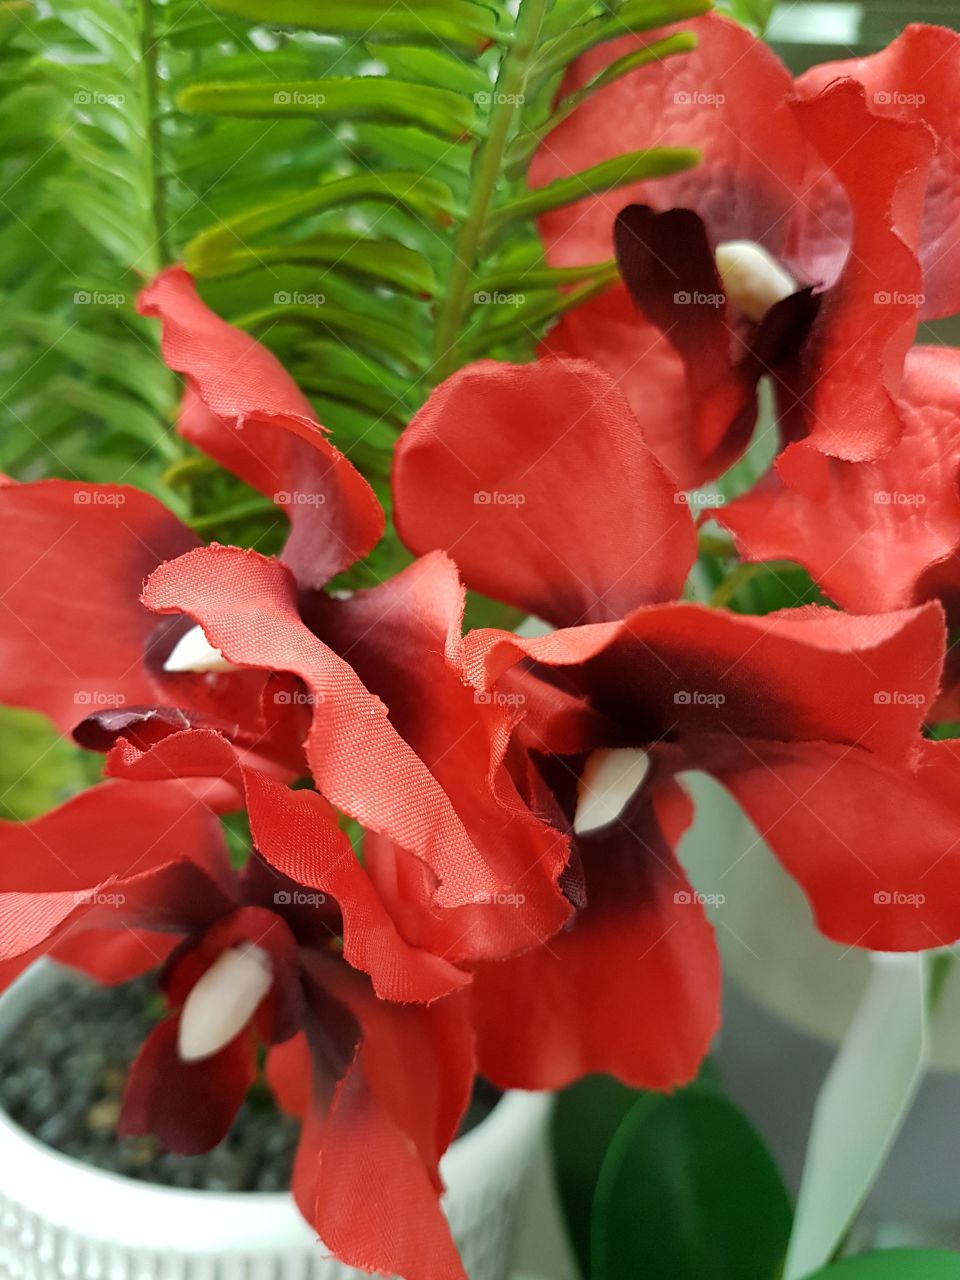 beautiful red orchid